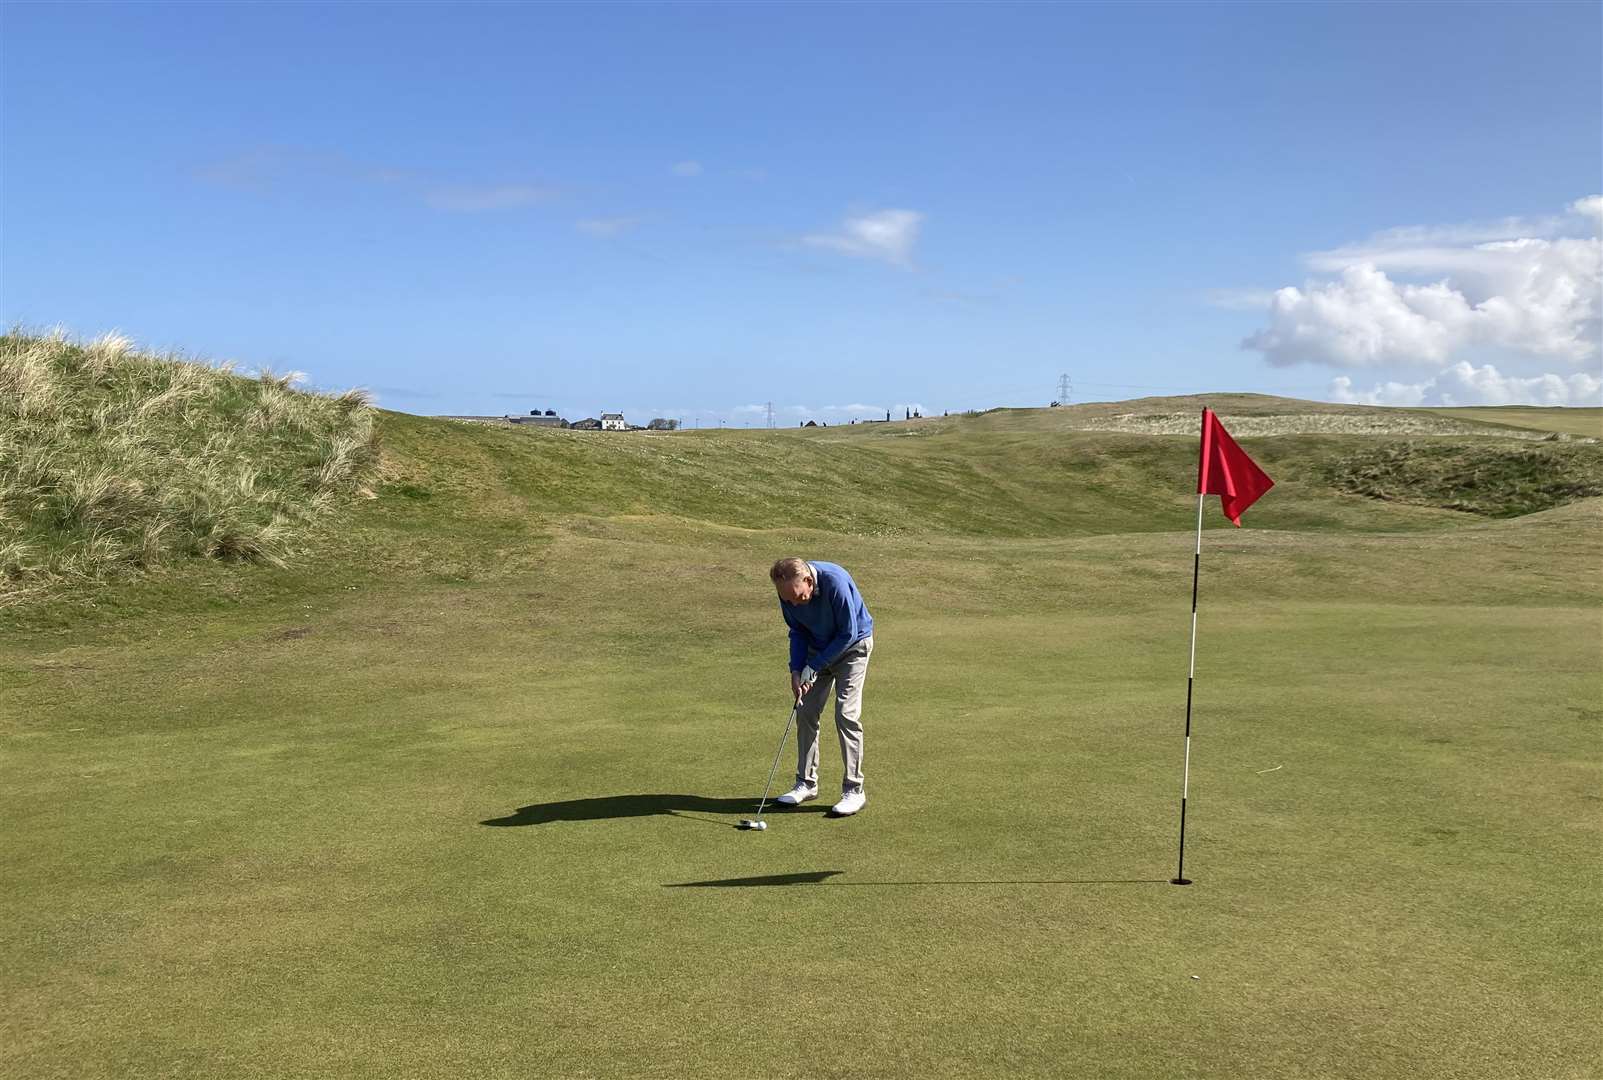 Murdo Macdonald putting at the 13th on the Reay links.